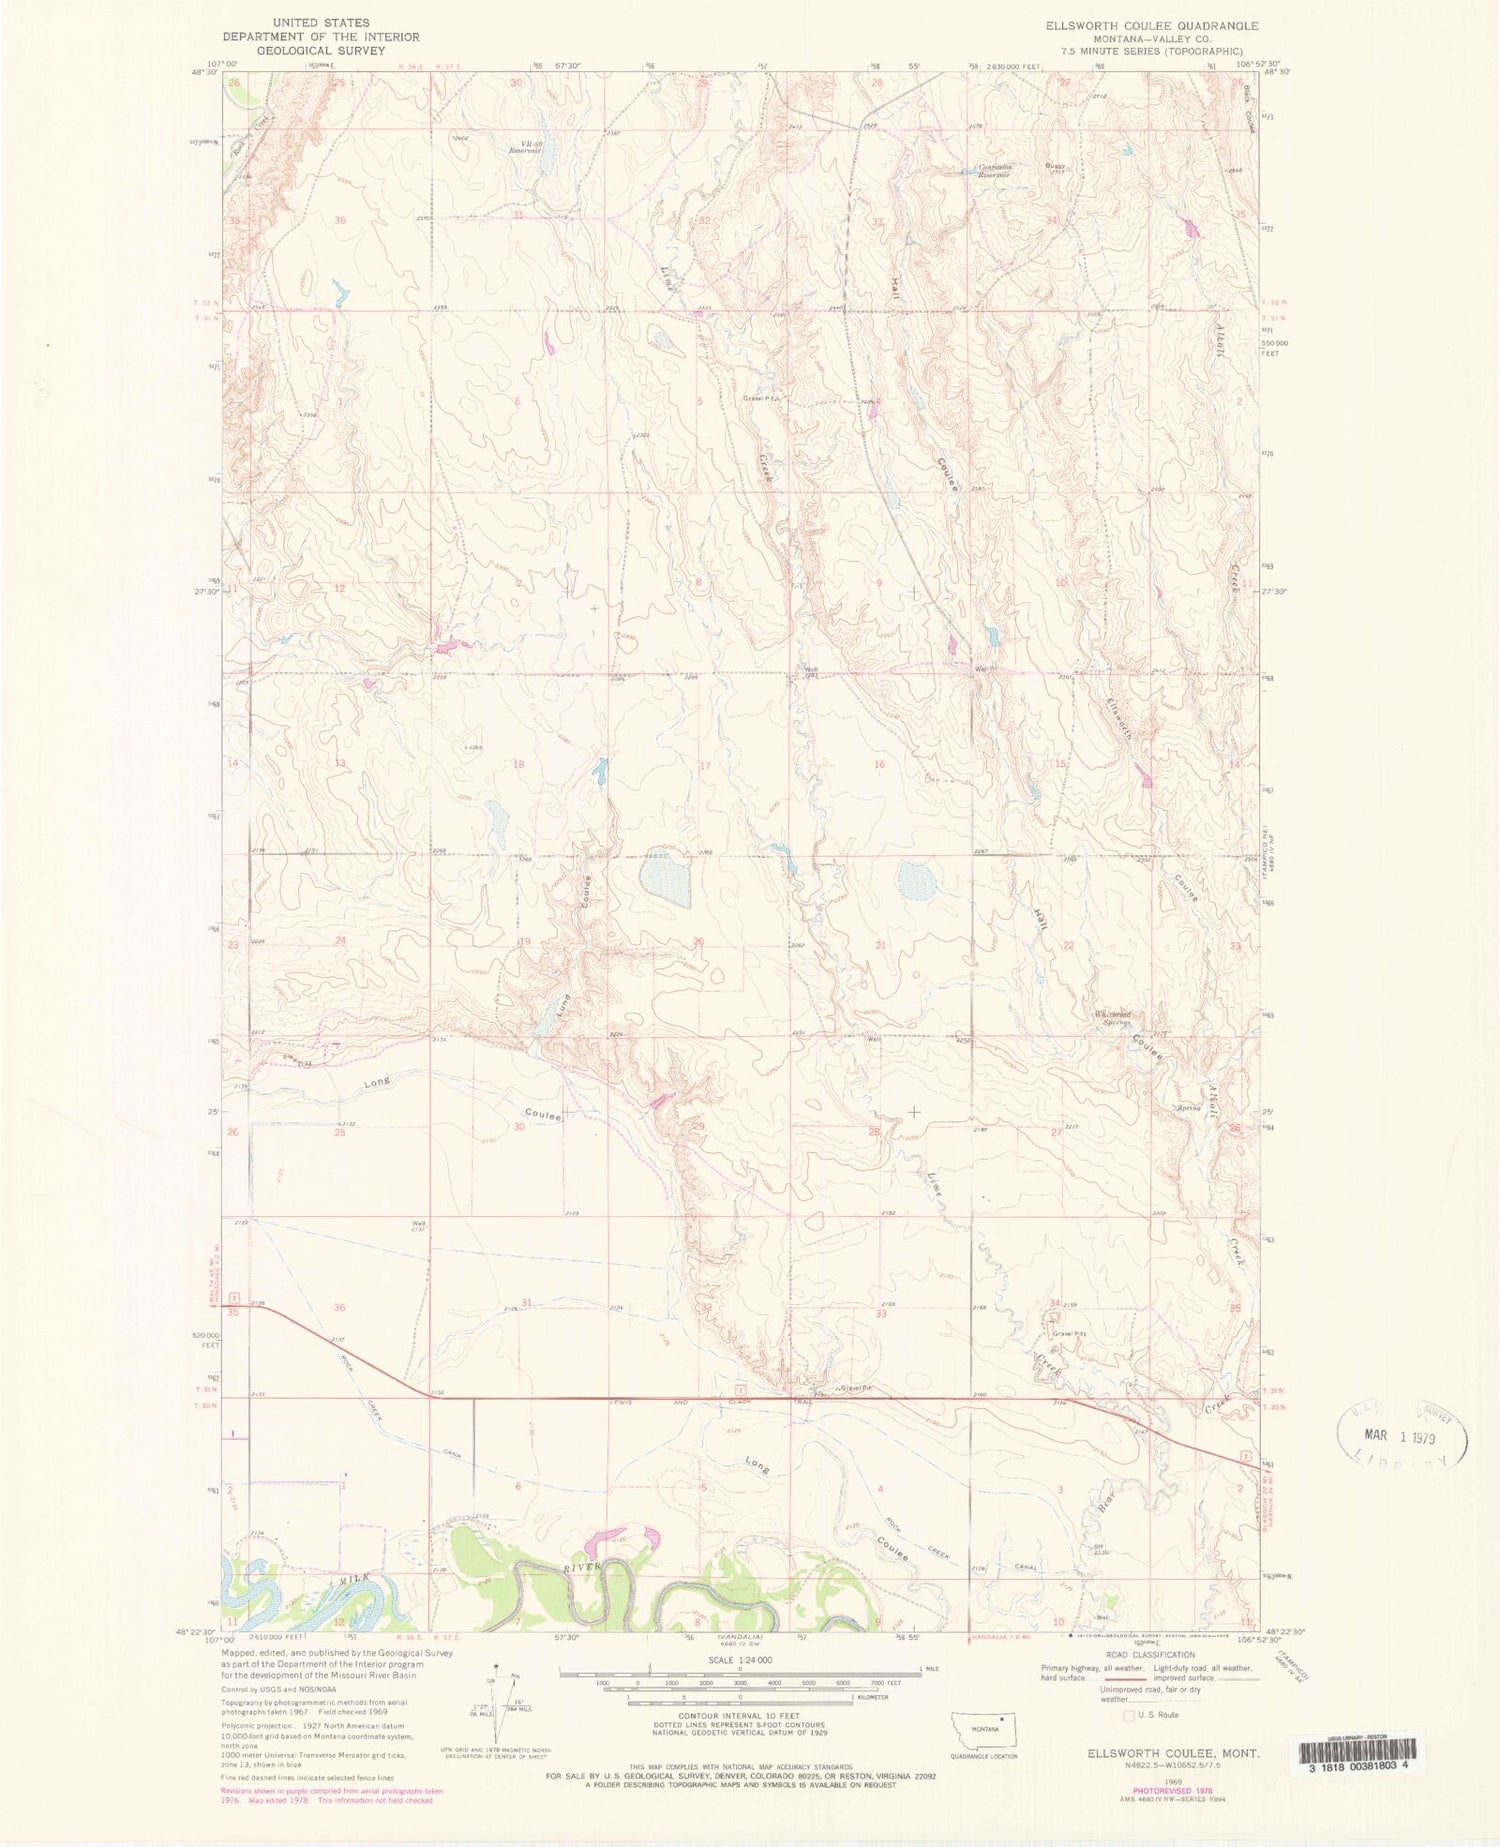 Classic USGS Ellsworth Coulee Montana 7.5'x7.5' Topo Map Image